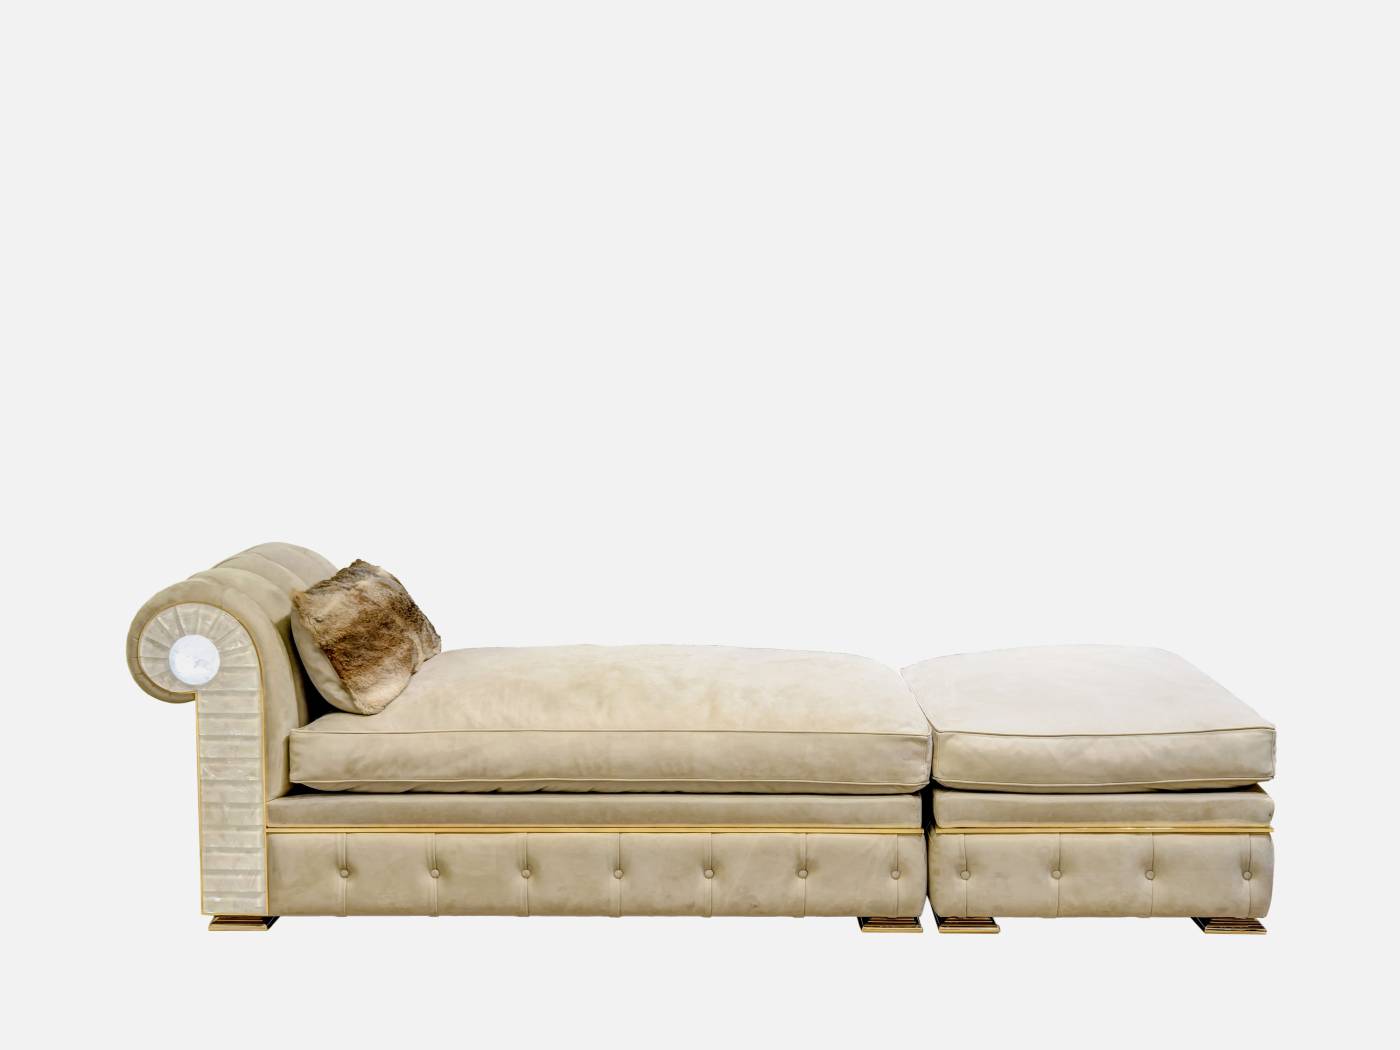 ART. 2076 – C.G. Capelletti Italian Luxury Classic Benches and dormeuses. Transform your space with sophisticated made in italy classic interior design.